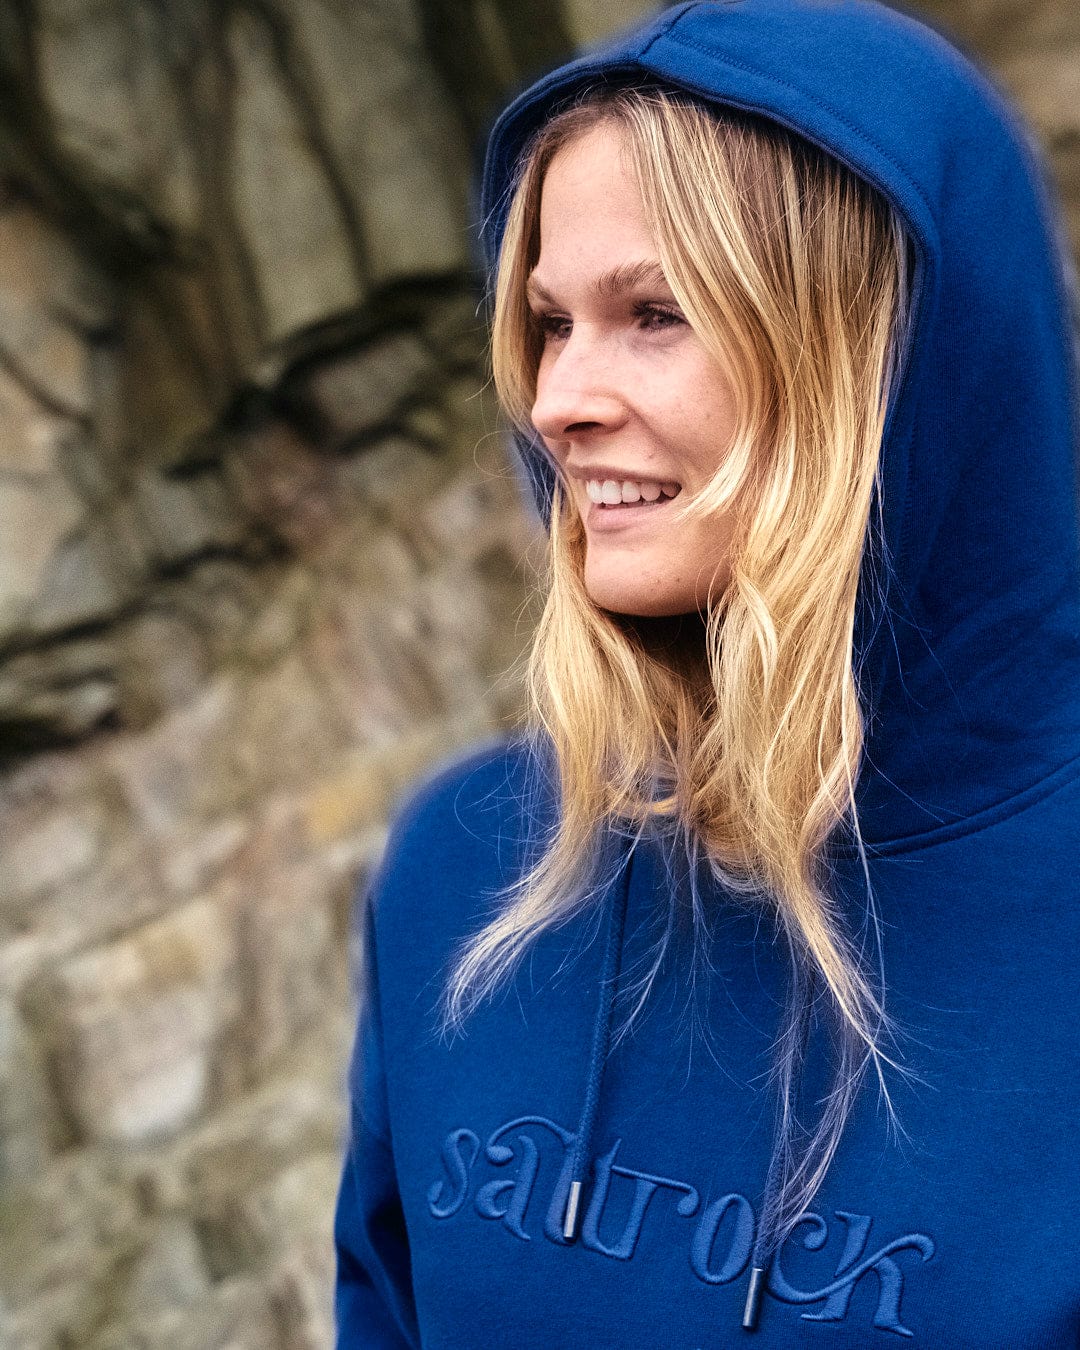 A young woman with Saltrock branding, wearing the Celeste - Womens Pop Hoodie - Blue with a drawstring hood.